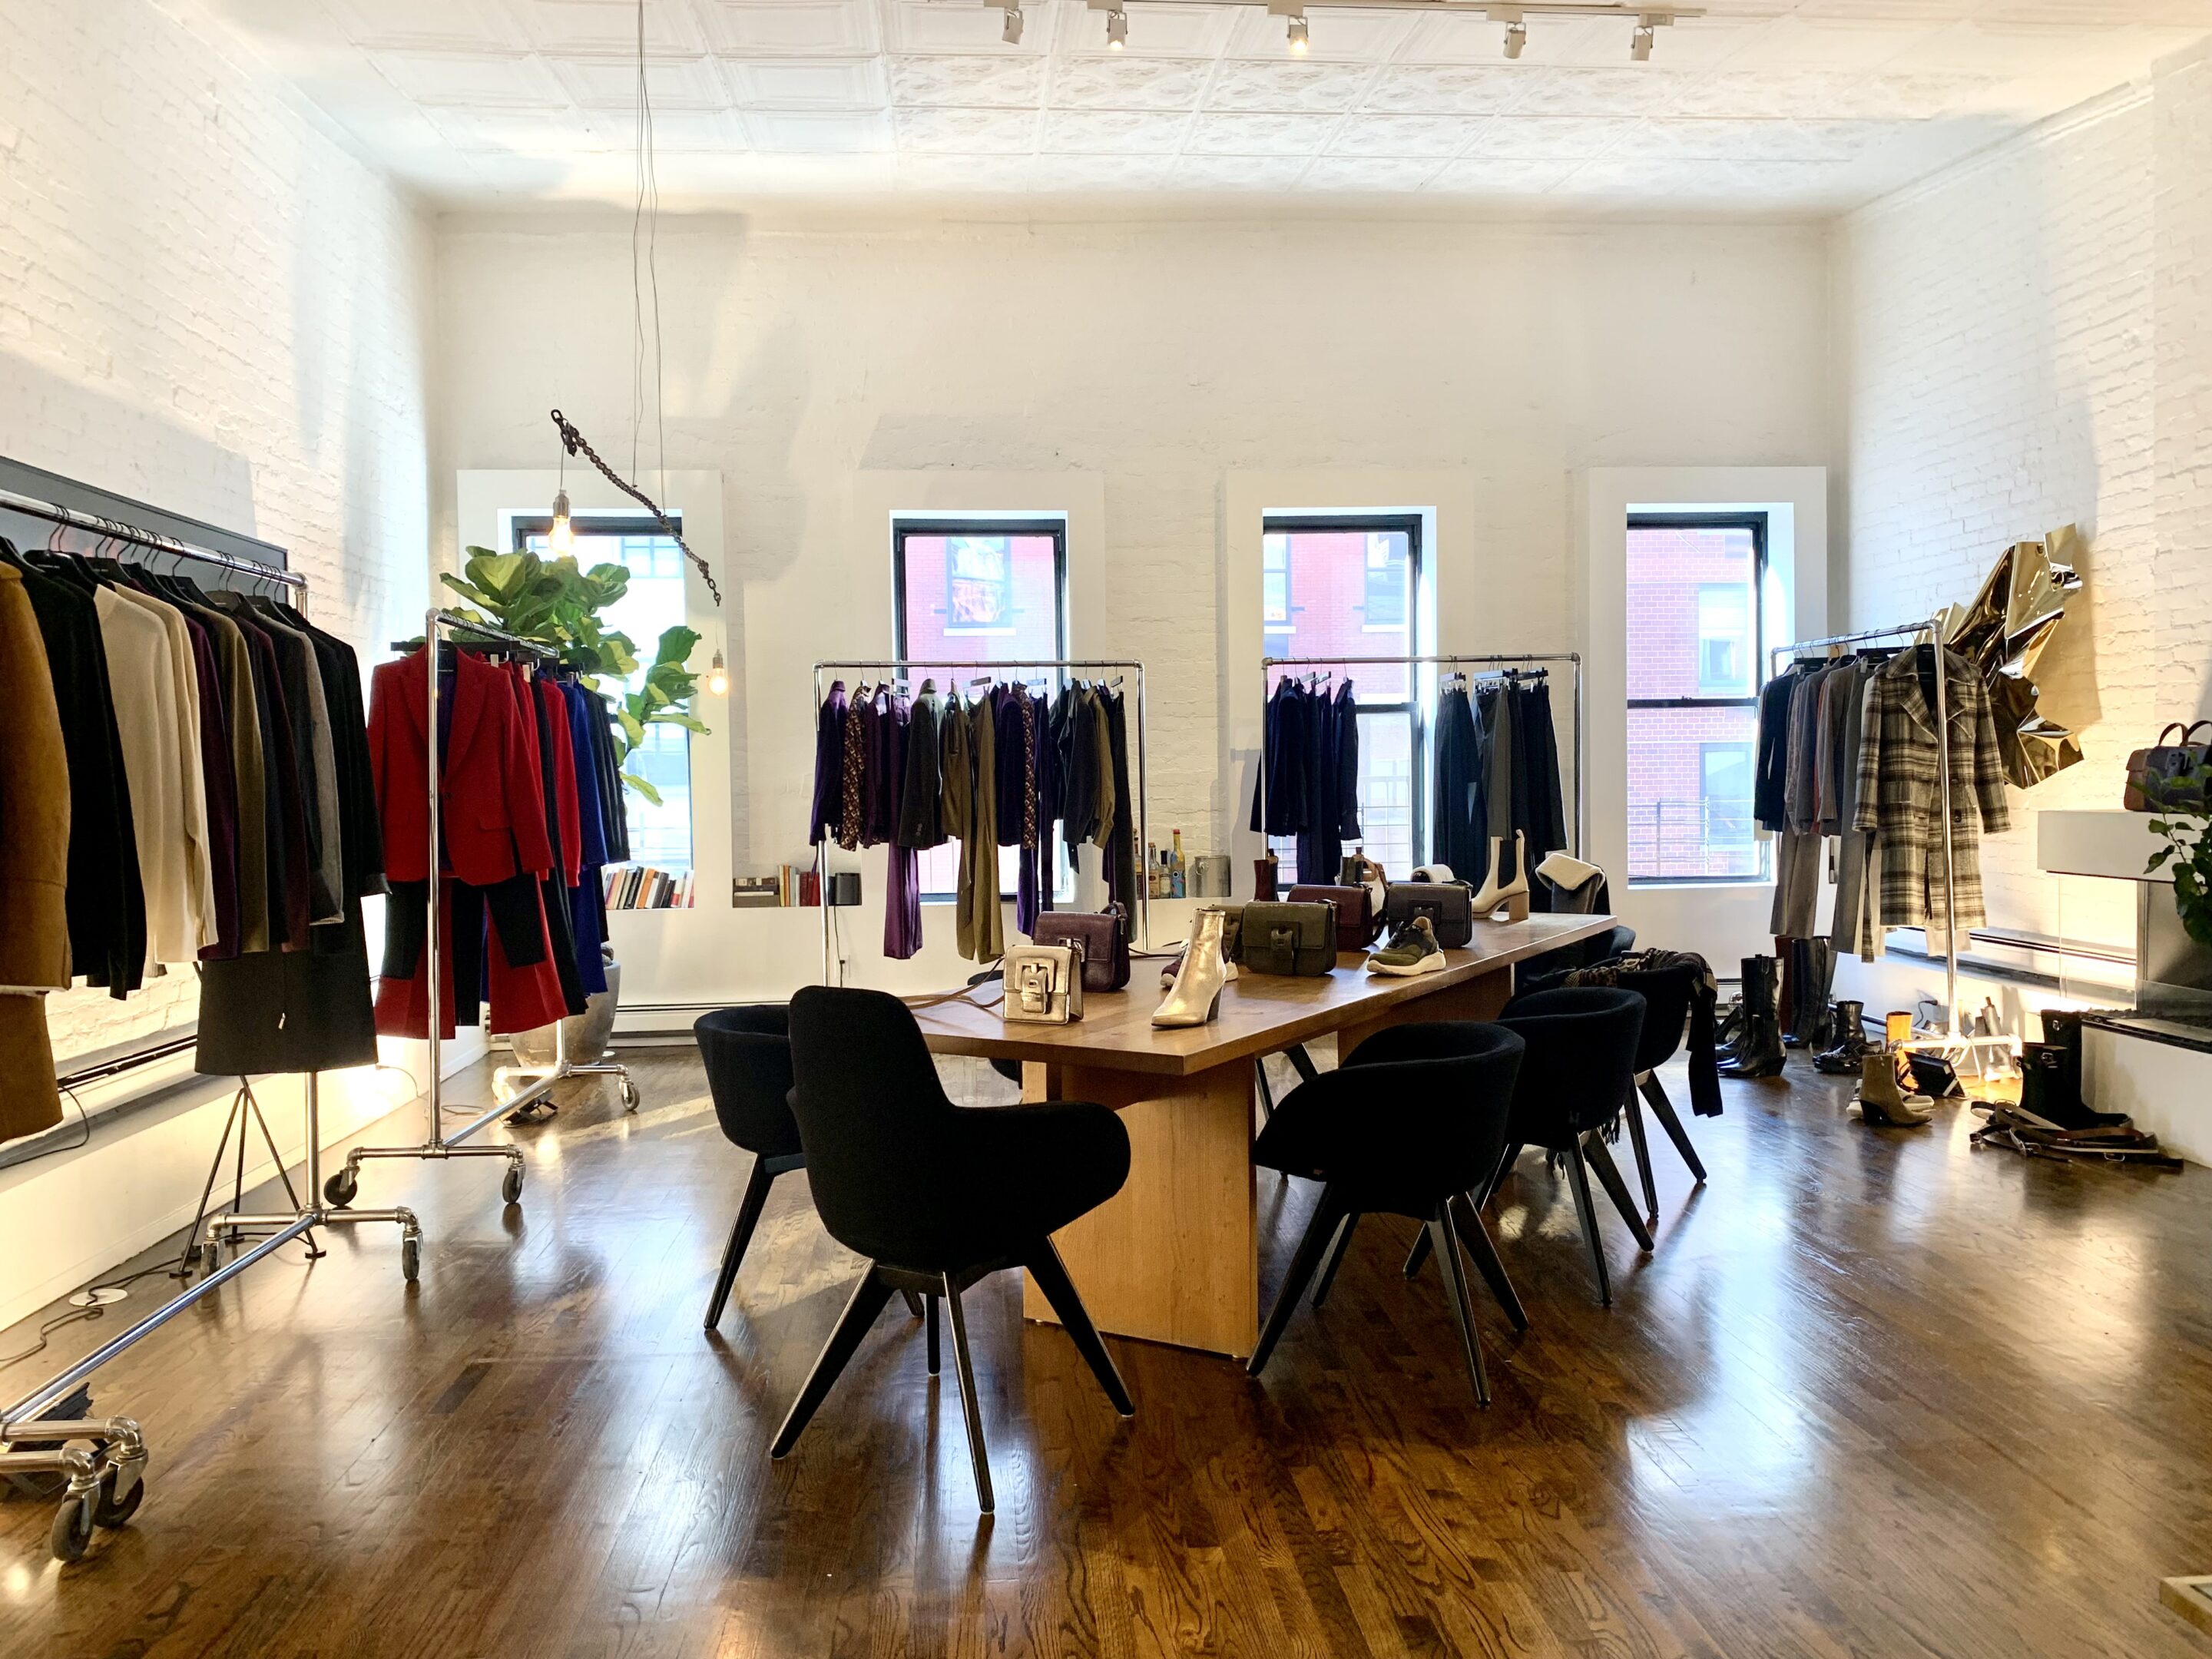 casa boto fashion showroom space rental_tribeca loft with high ceilings wooden floors clothing rack displays dining table accessories display and black tom dixon dining chairs